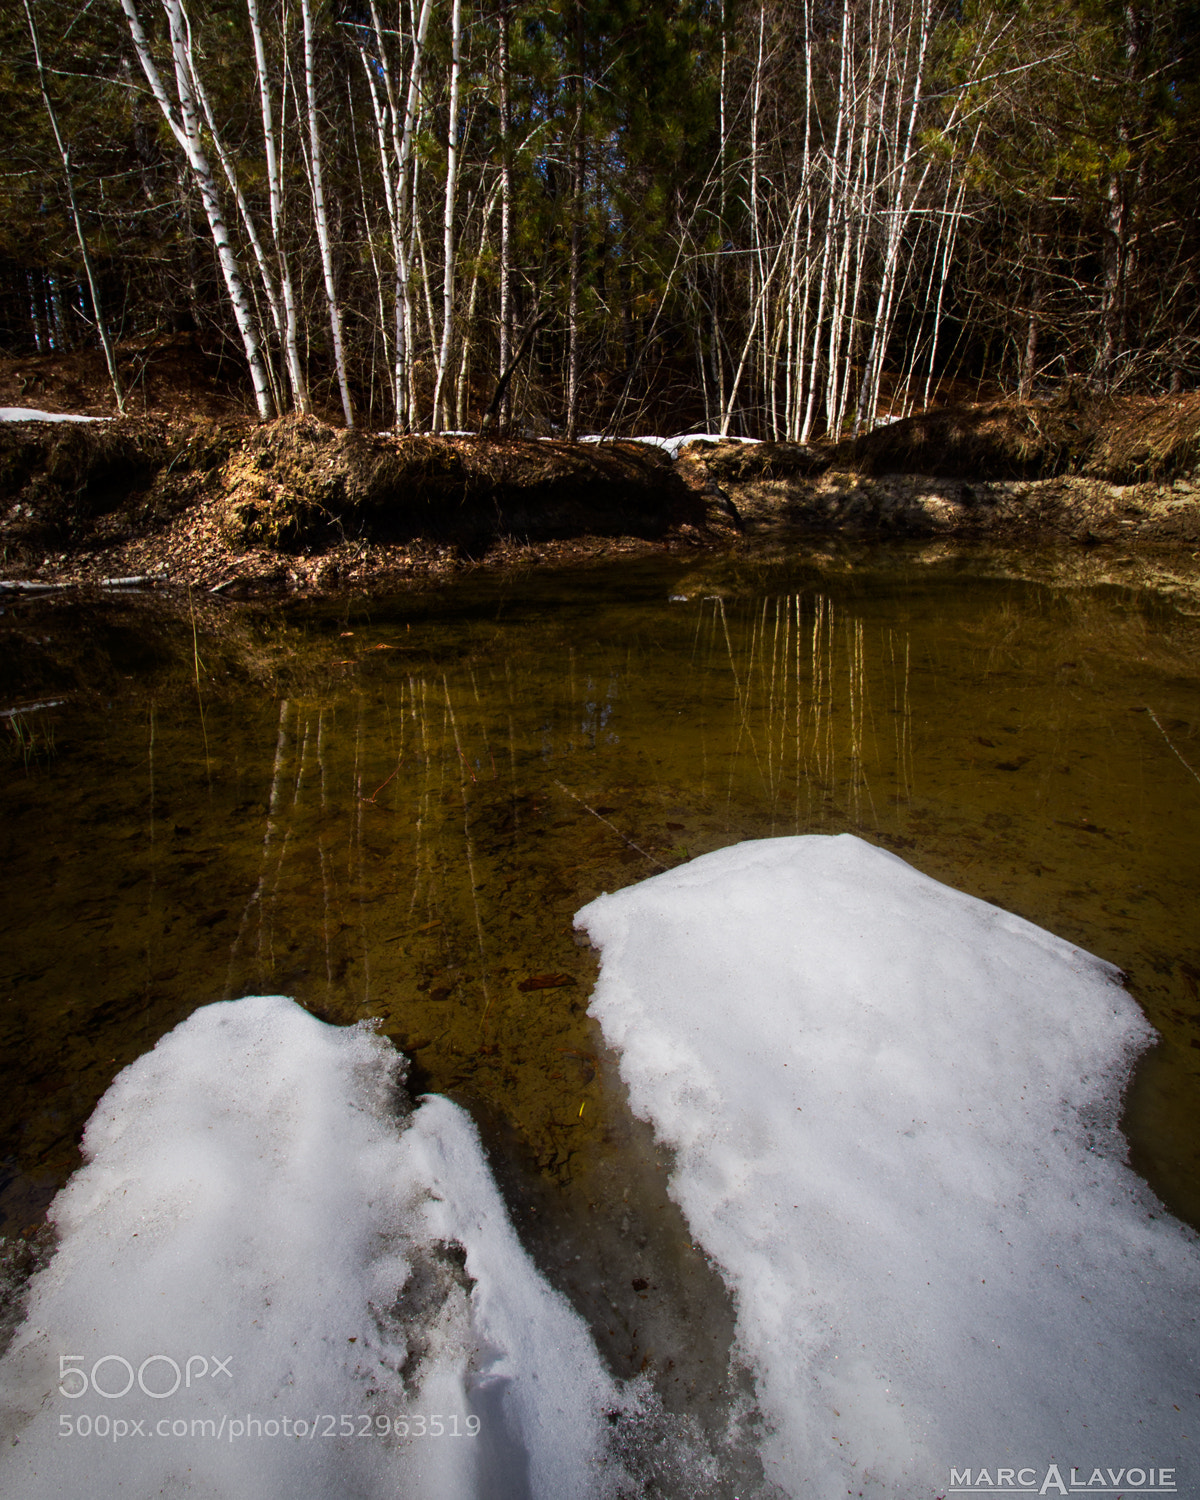 Pentax K-3 sample photo. Early spring birch reflection photography